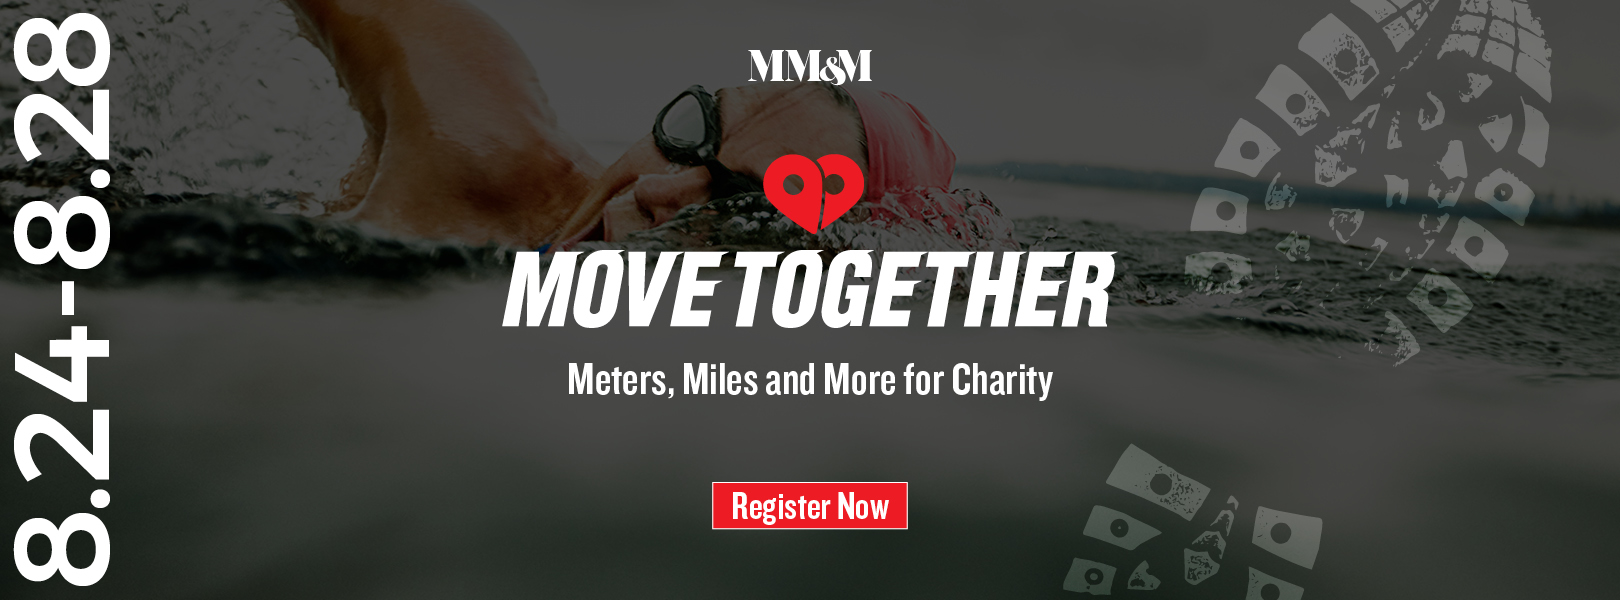 Join MM&M Move Together, a fitness challenge for charity this August